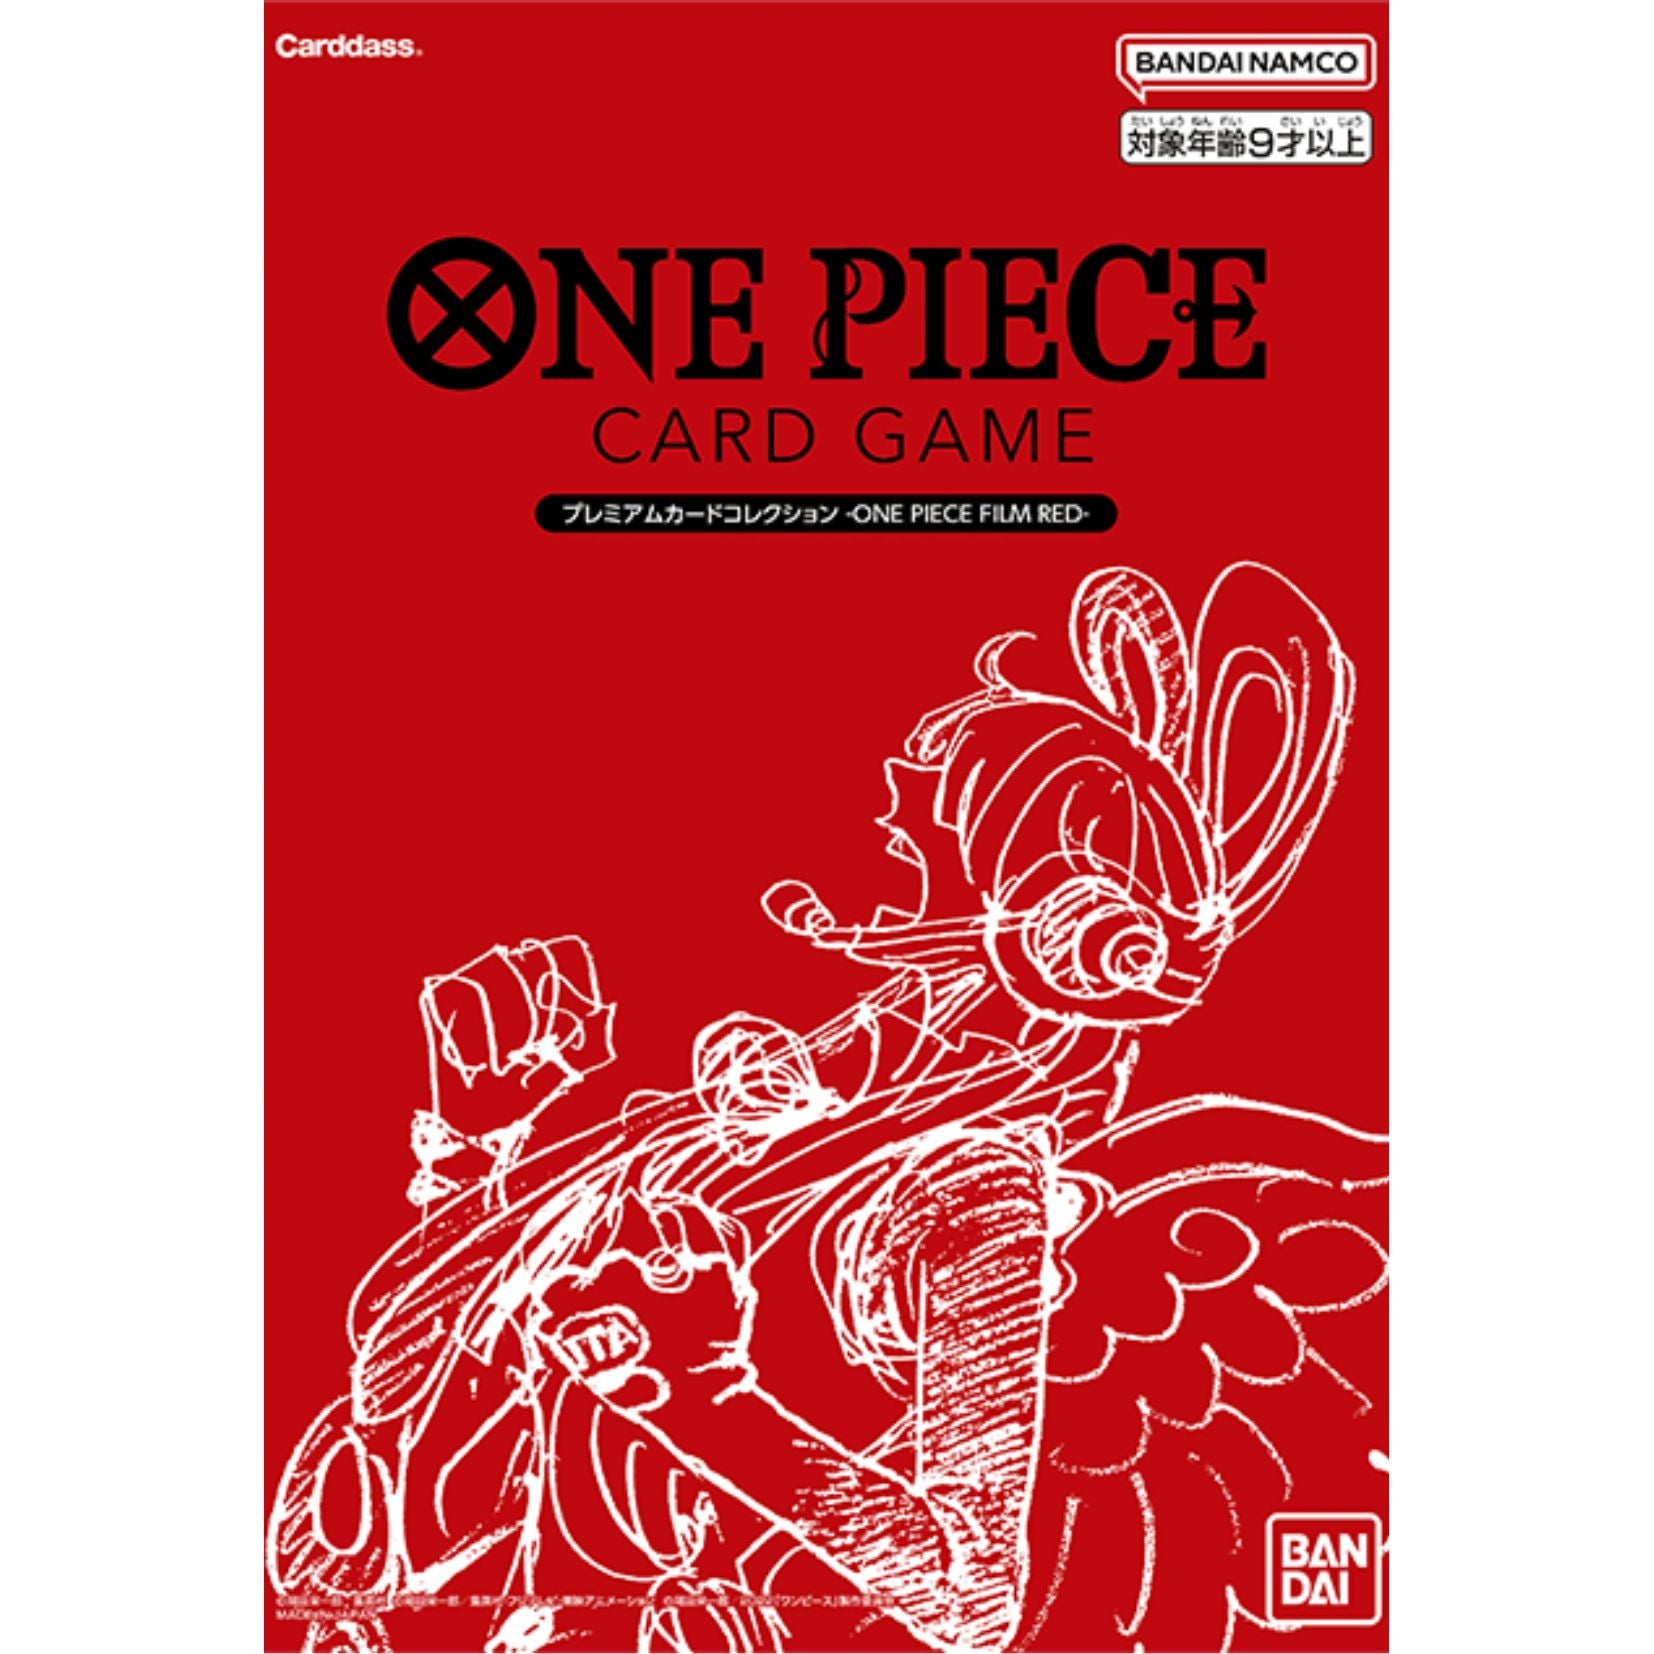 Premium Card Collection - One Piece Card Game FILM RED Edition